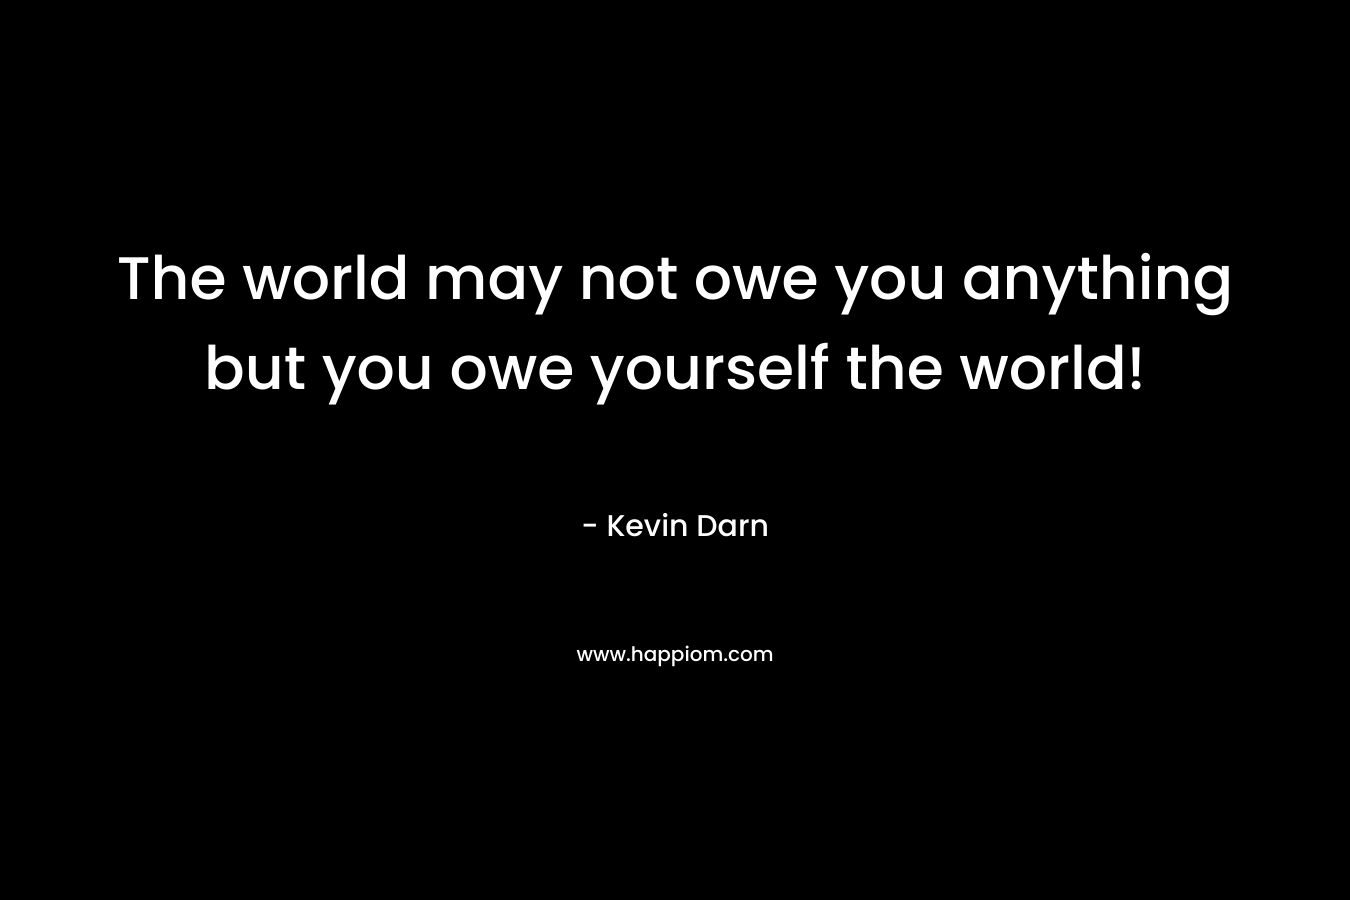 The world may not owe you anything but you owe yourself the world!